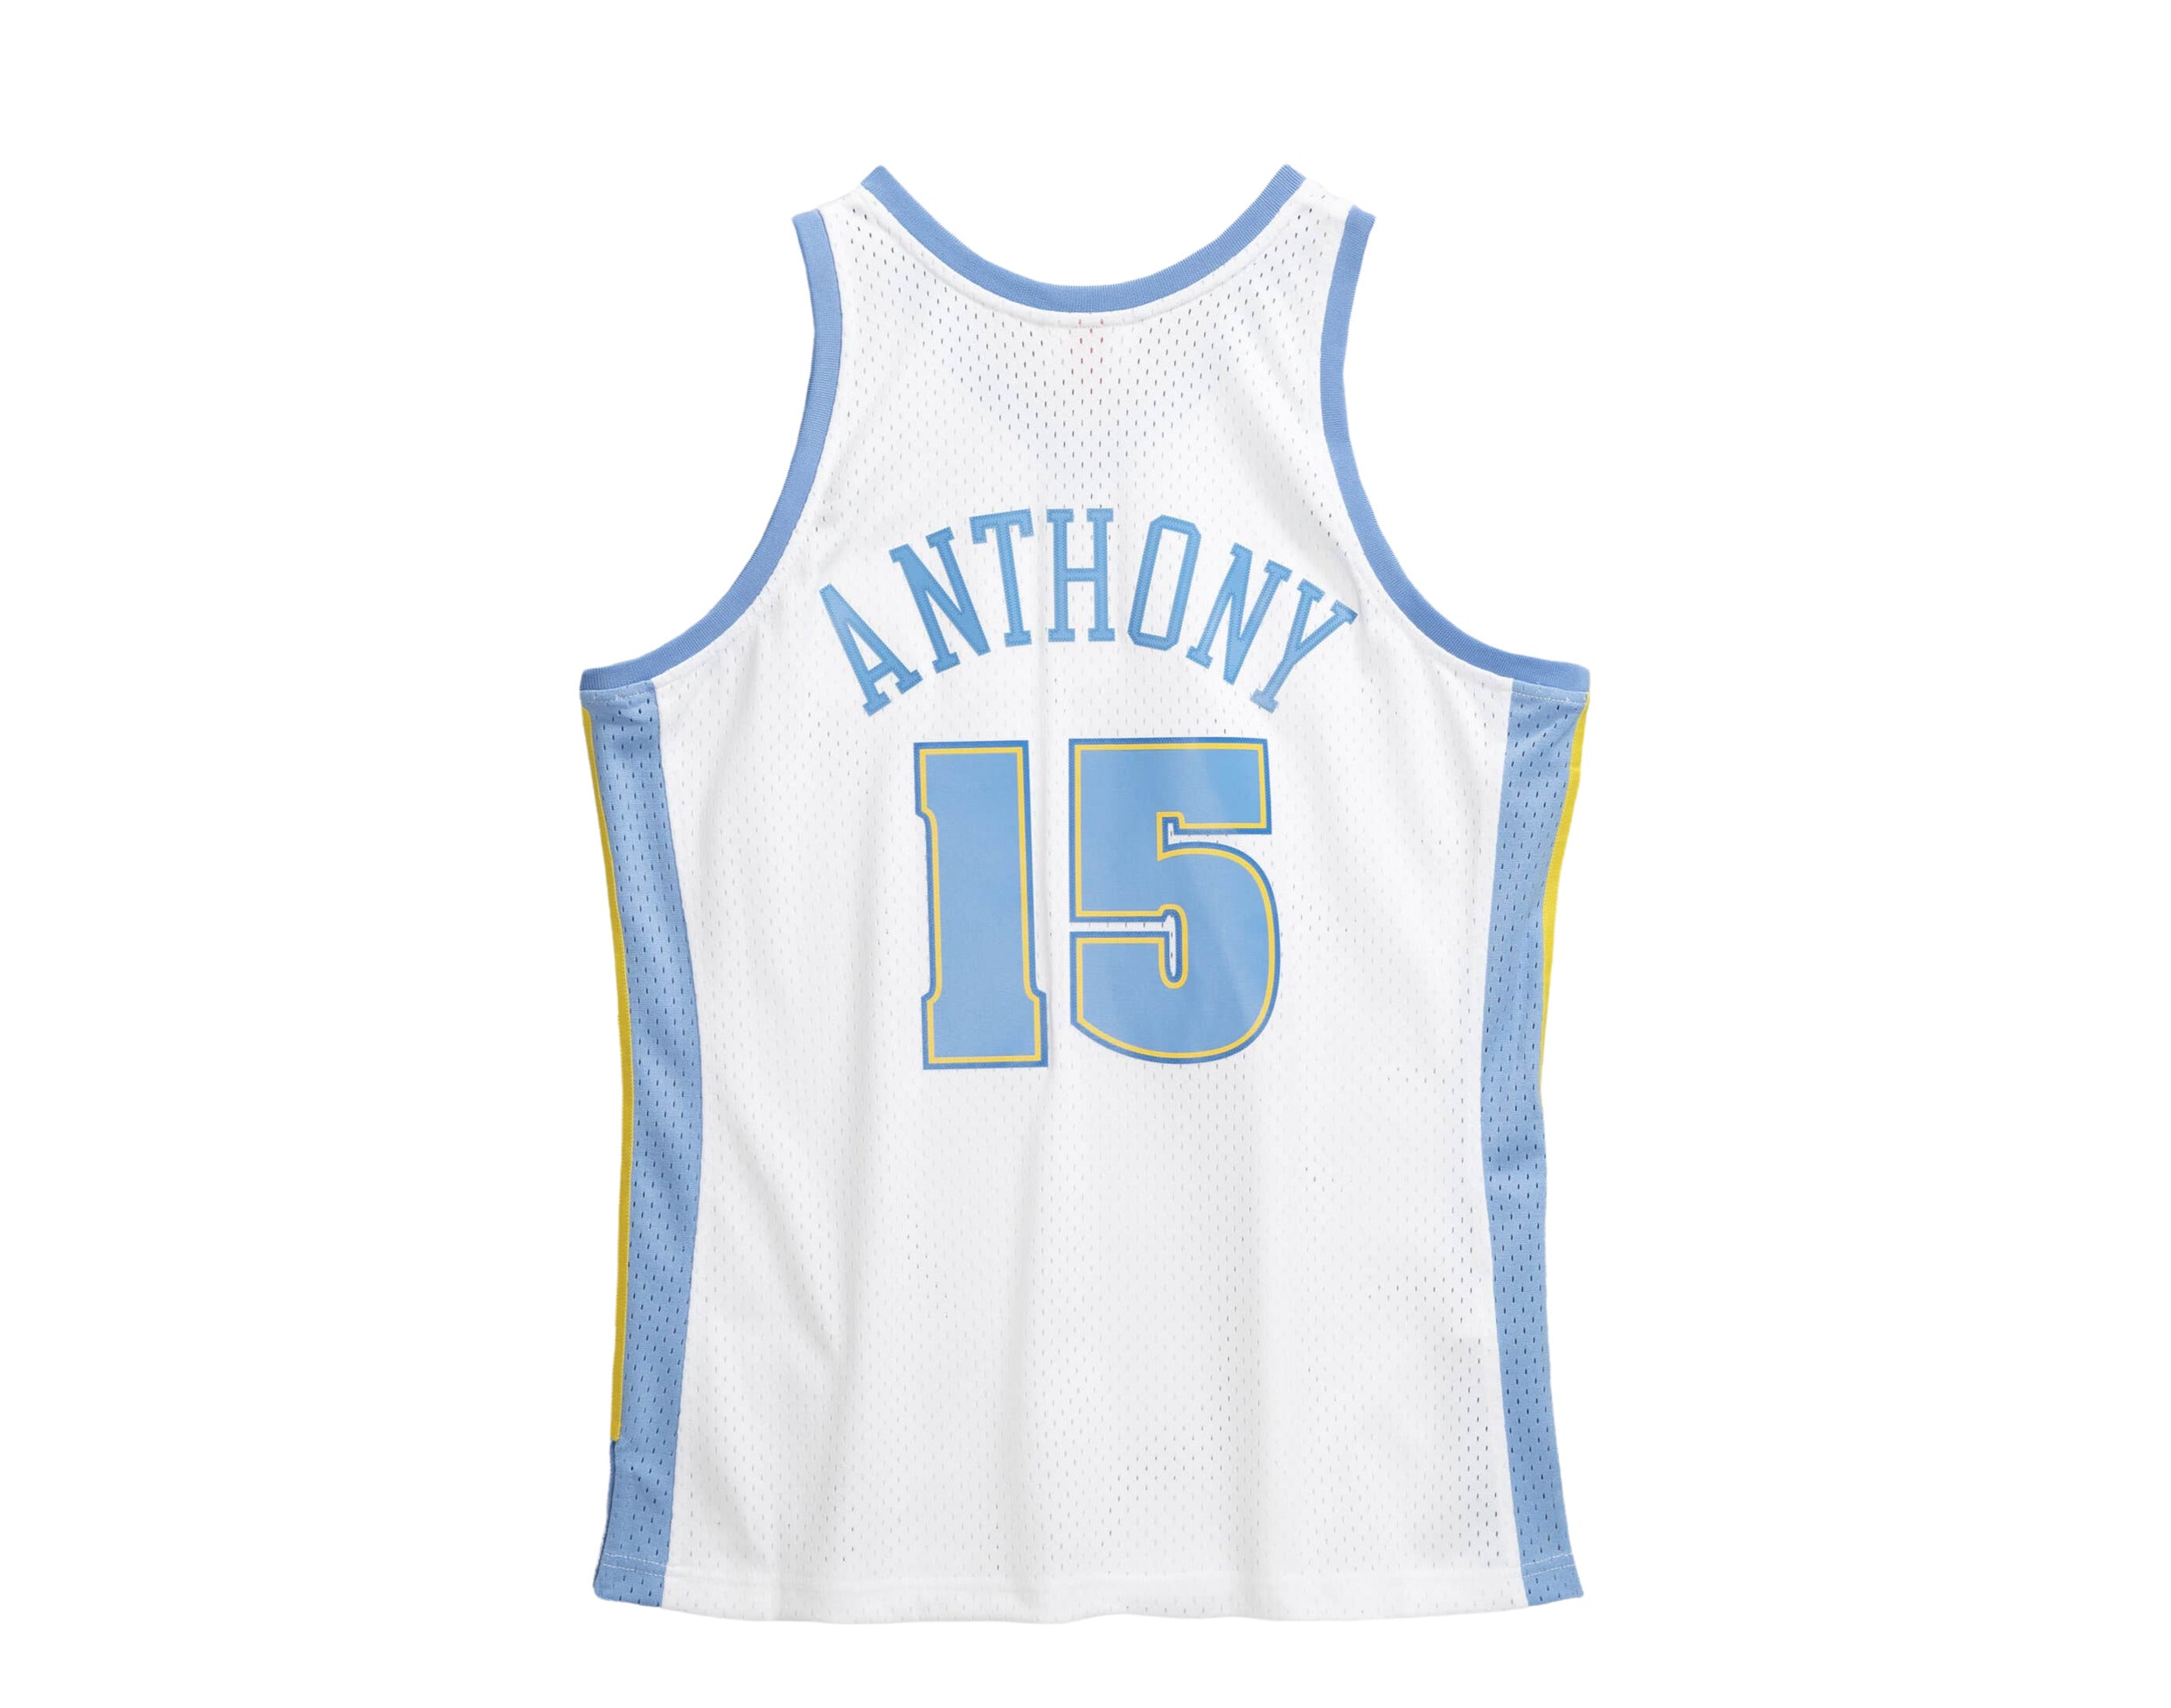 carmelo anthony throwback nuggets jersey